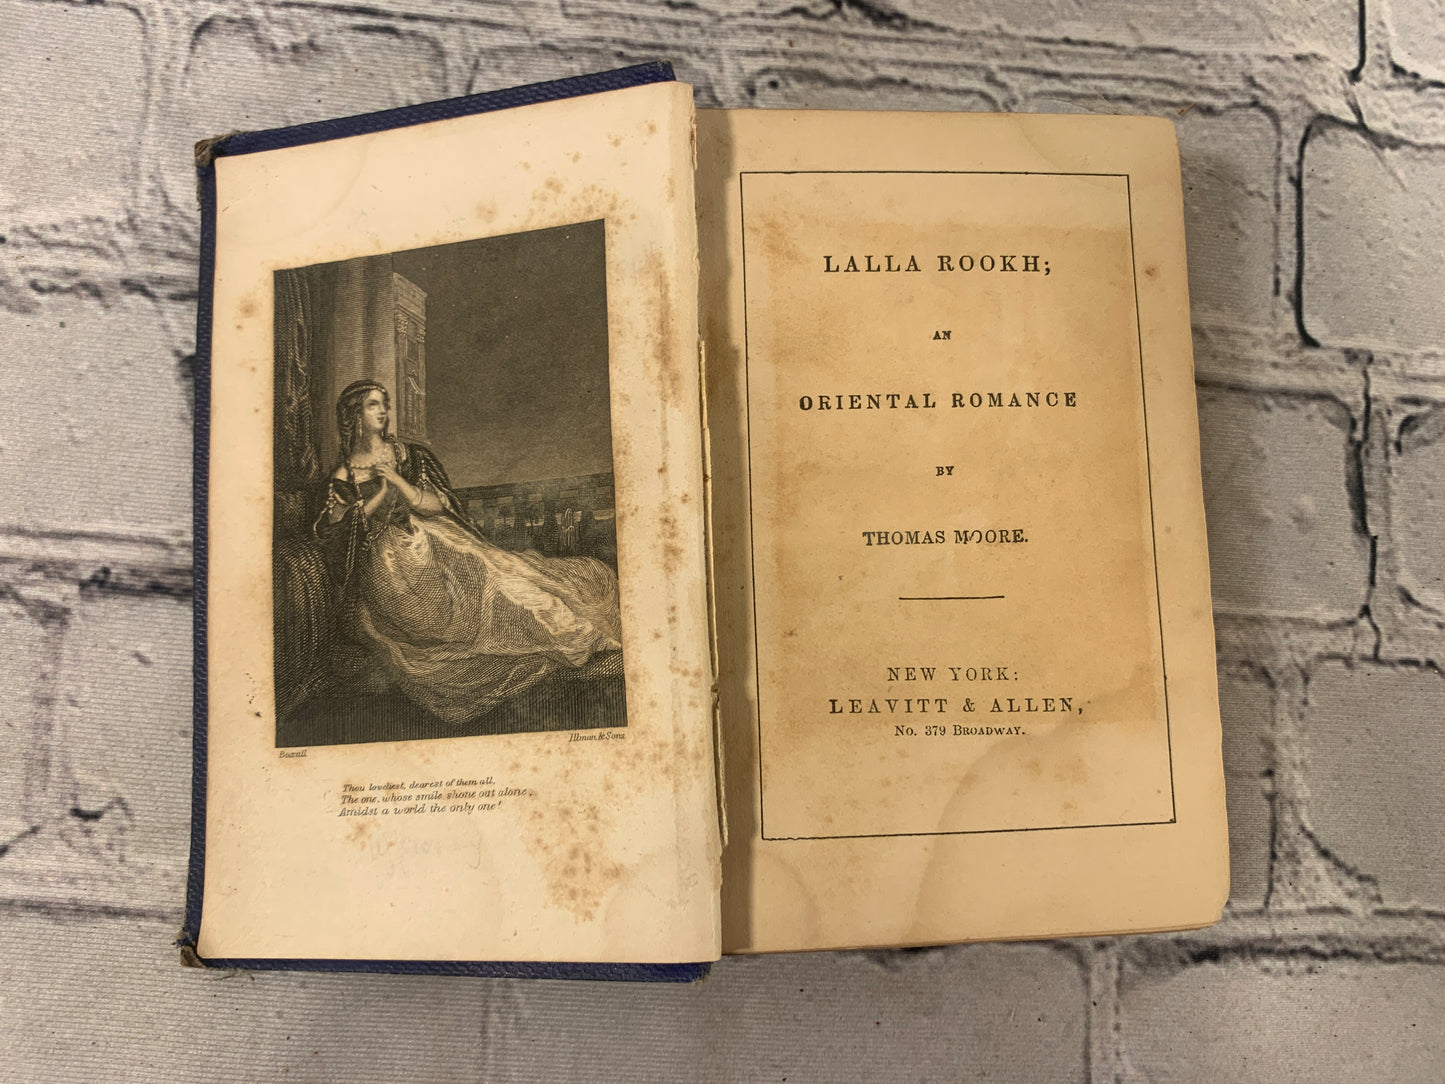 Lalla Rookh an Oriental Romance by Thomas Moore [1850s]